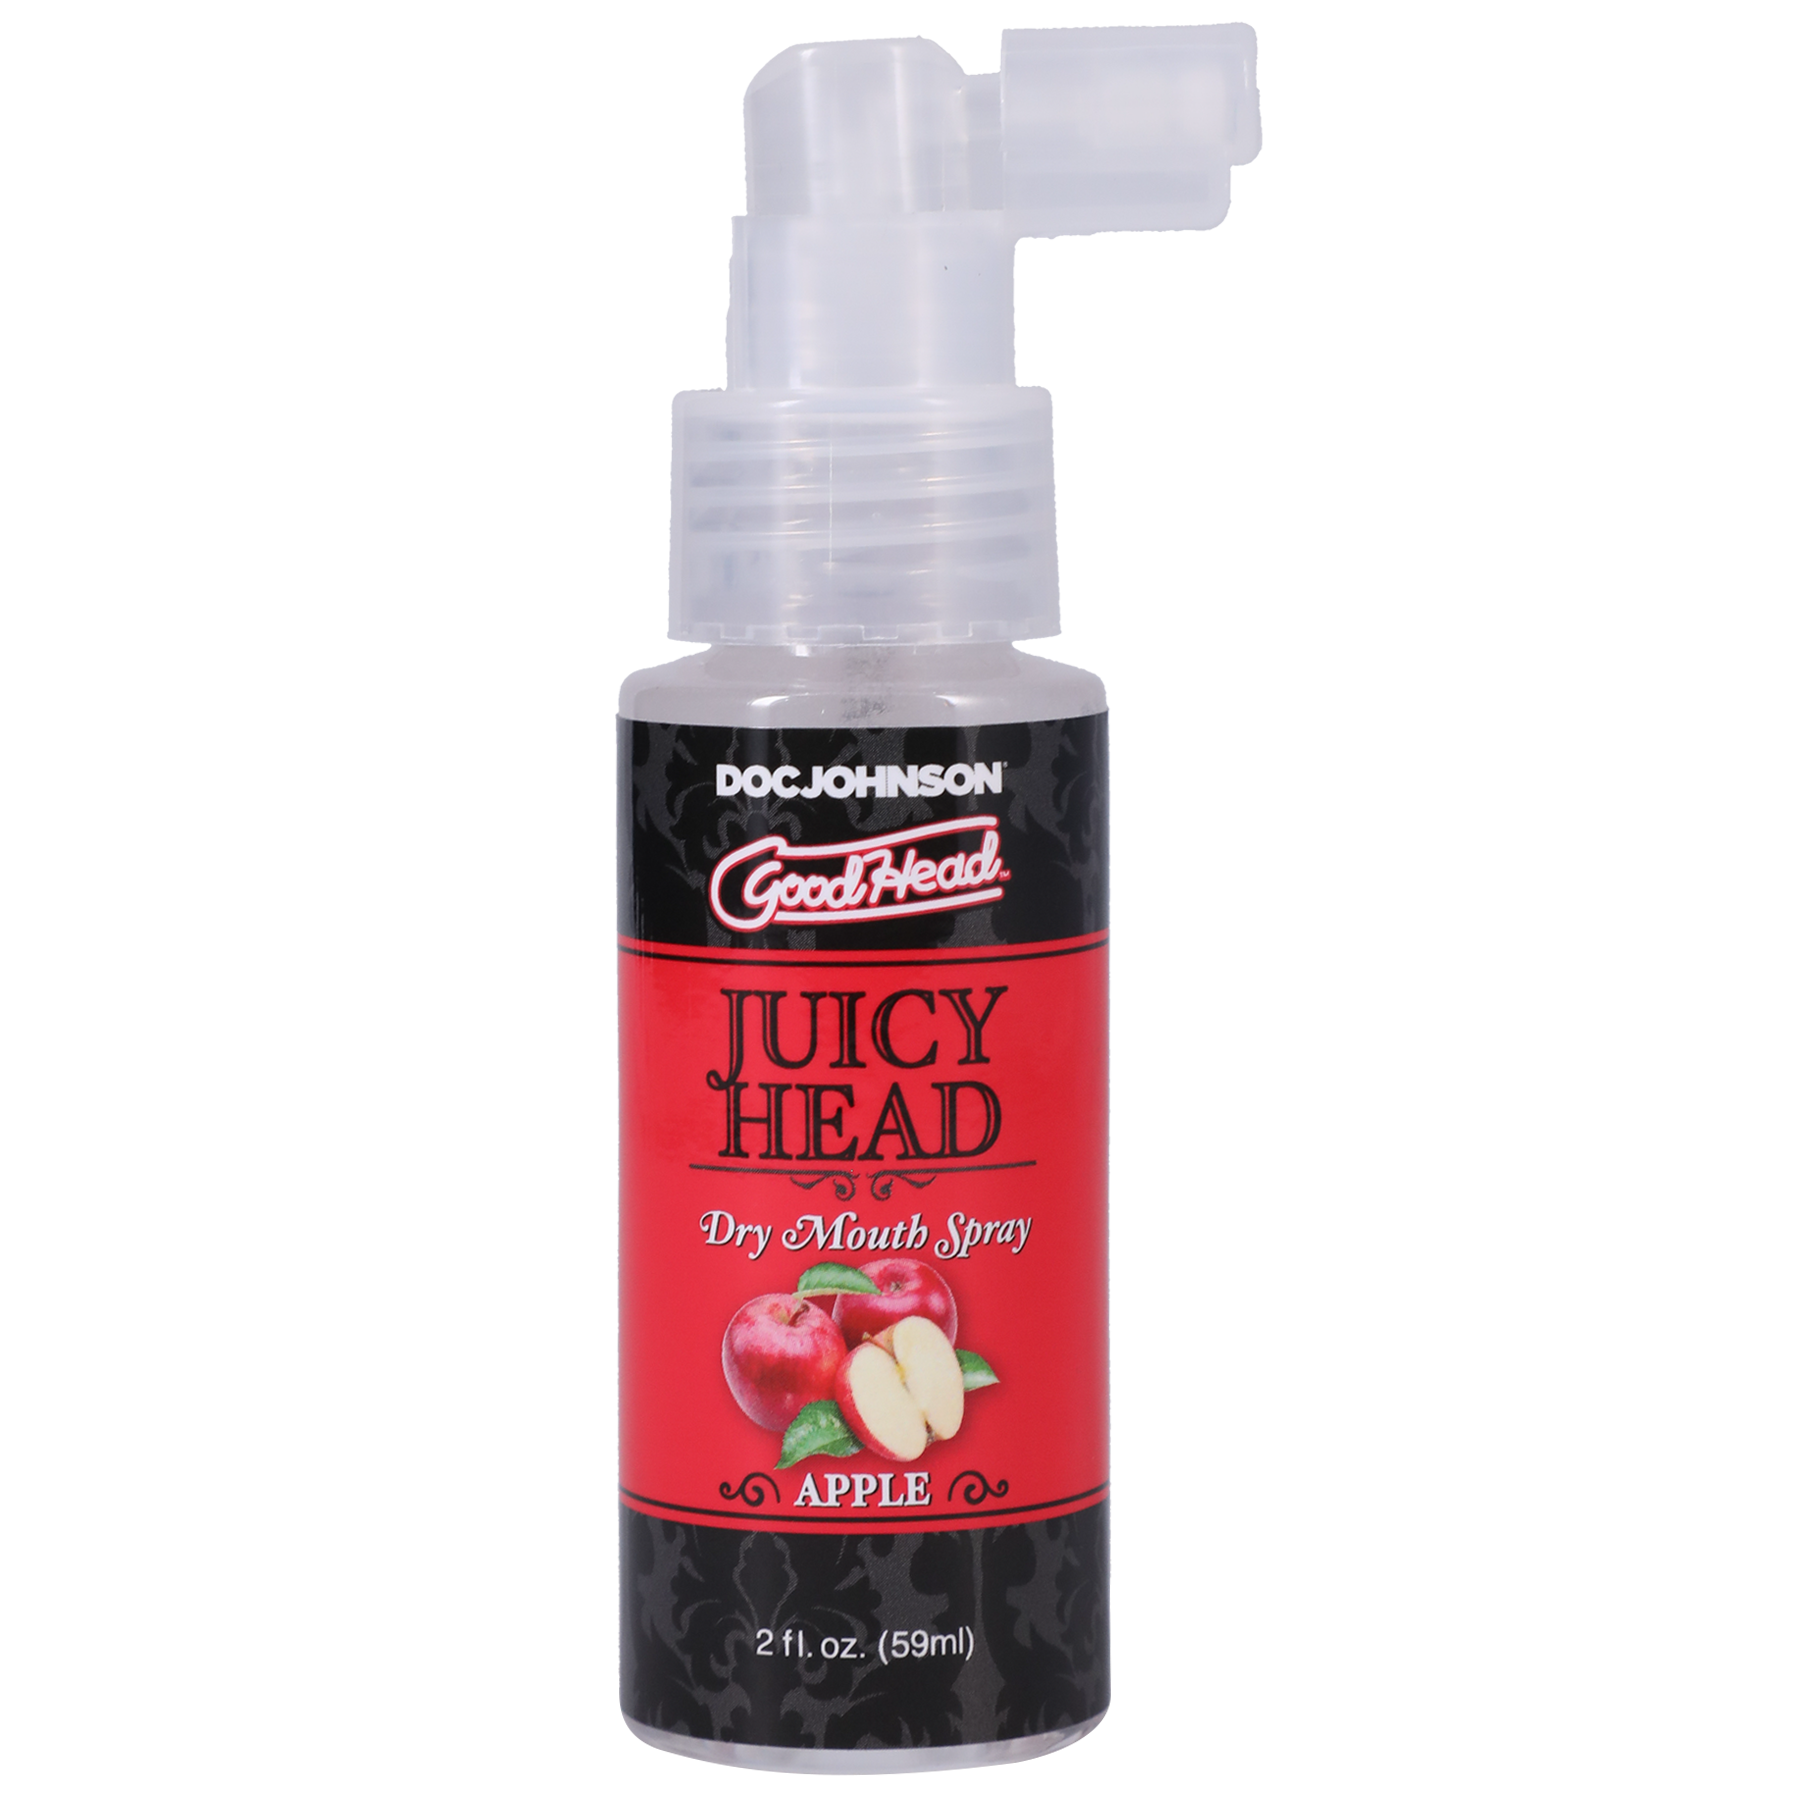 Photo of the bottle of GoodHead Juicy Head from Doc Johson (apple) shows its easy to use pump spray nozzle.